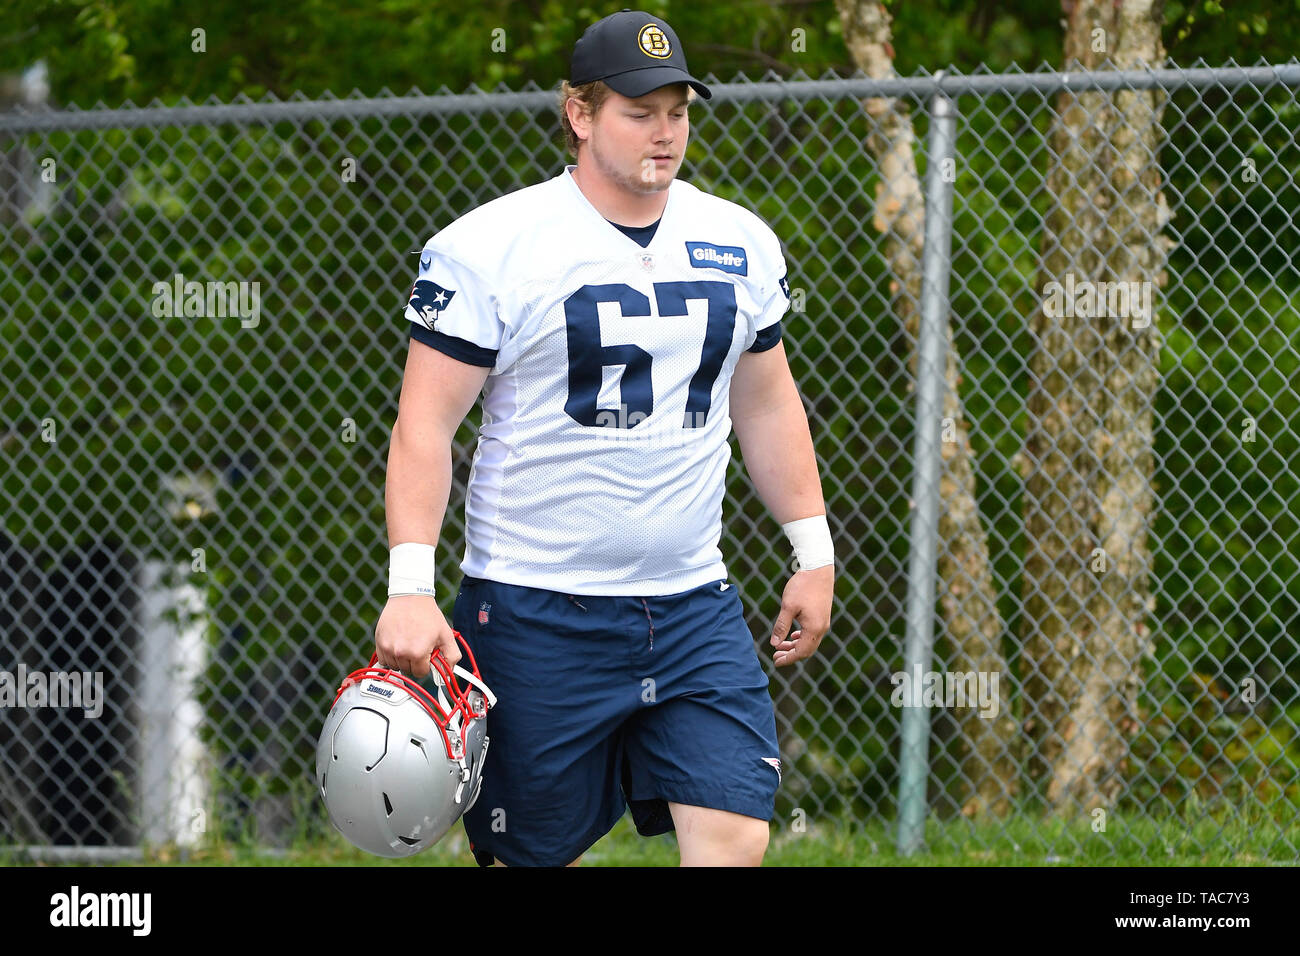 Foxborough, Massachusetts, USA. 23rd May, 2019. New England Patriots offensive tackle Tyler Gauthier (67) takes part in the the New England Patriots OTA held at Gillette Stadium, in Foxborough, Massachusetts. Eric Canha/CSM/Alamy Live News Stock Photo